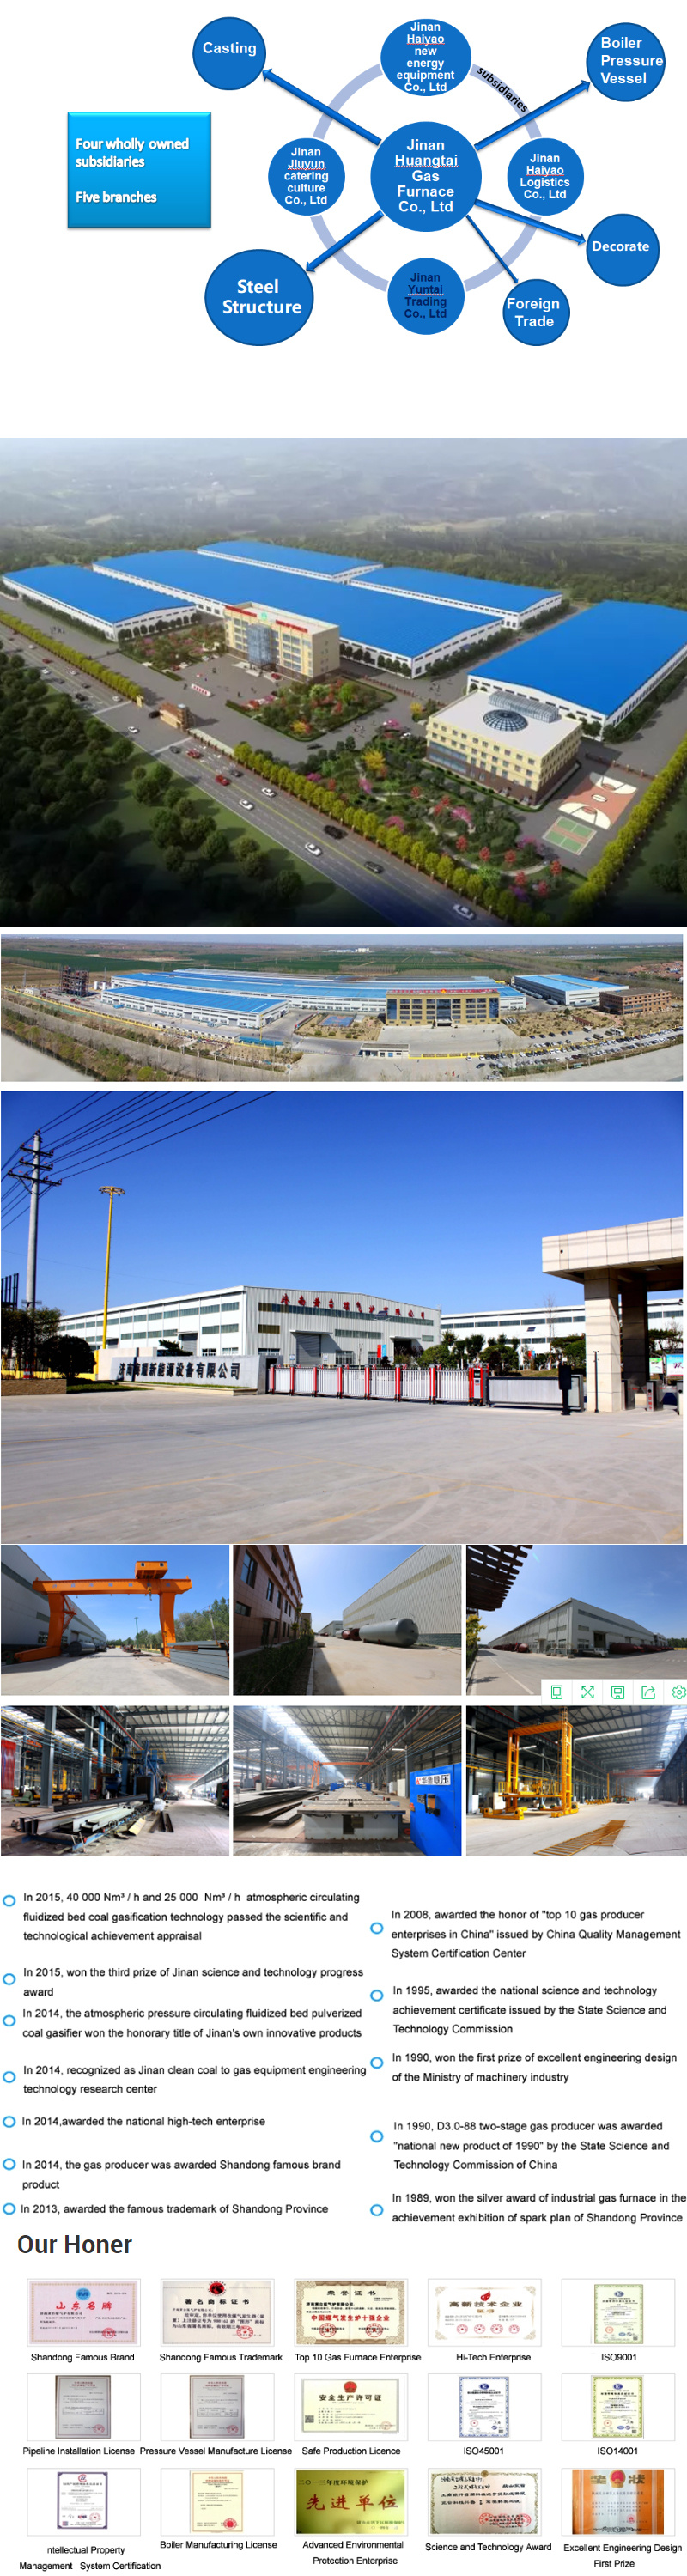 China Big Steel Casting Foundry Cast Iron Foundry Cast Steel Anvil